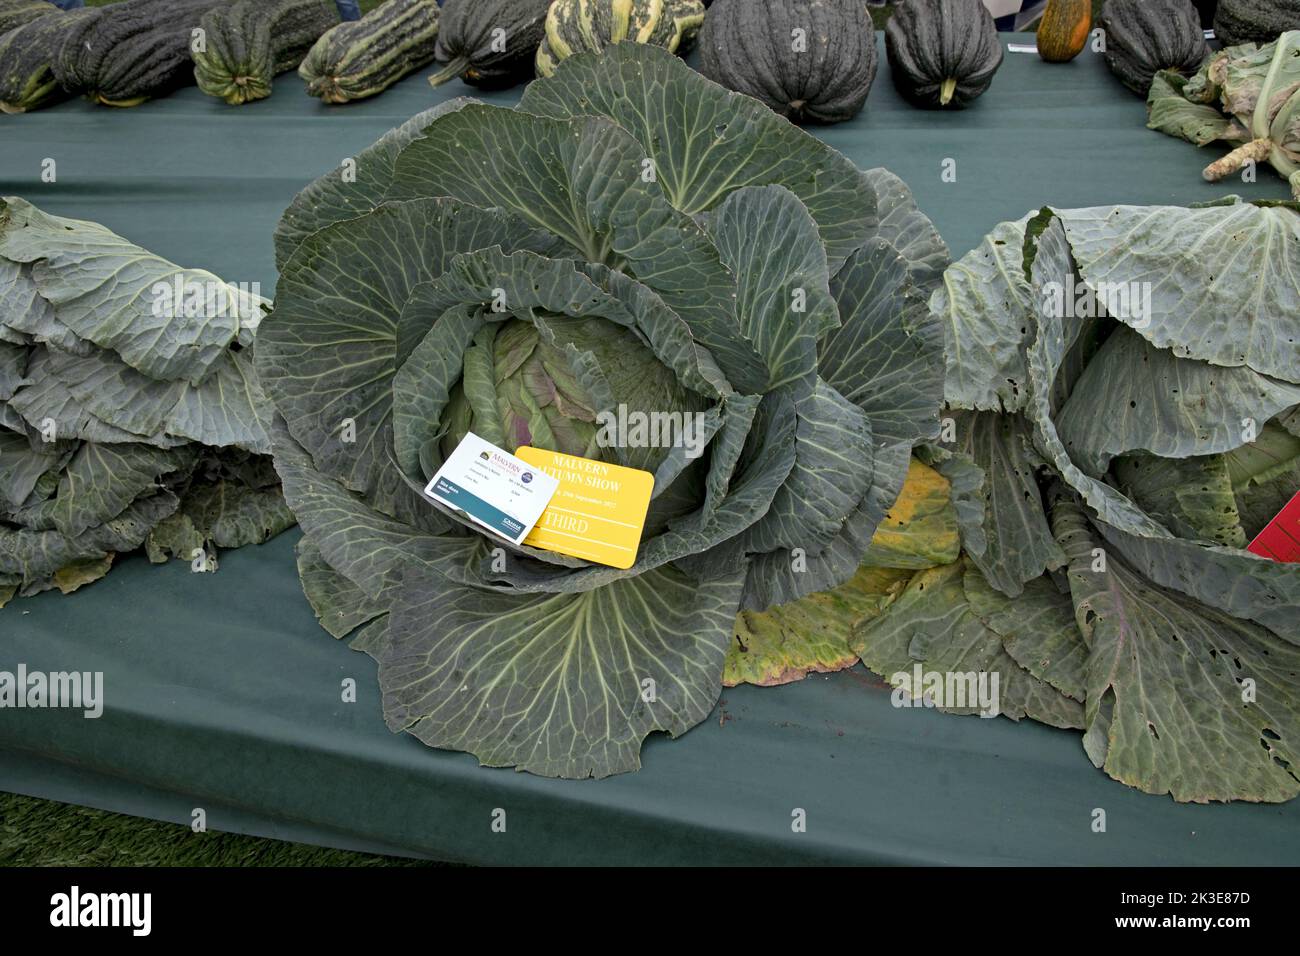 Giant cabbages are some of the giant vegetables at Three Counties Autumn Show  Great Malvern, UK Stock Photo